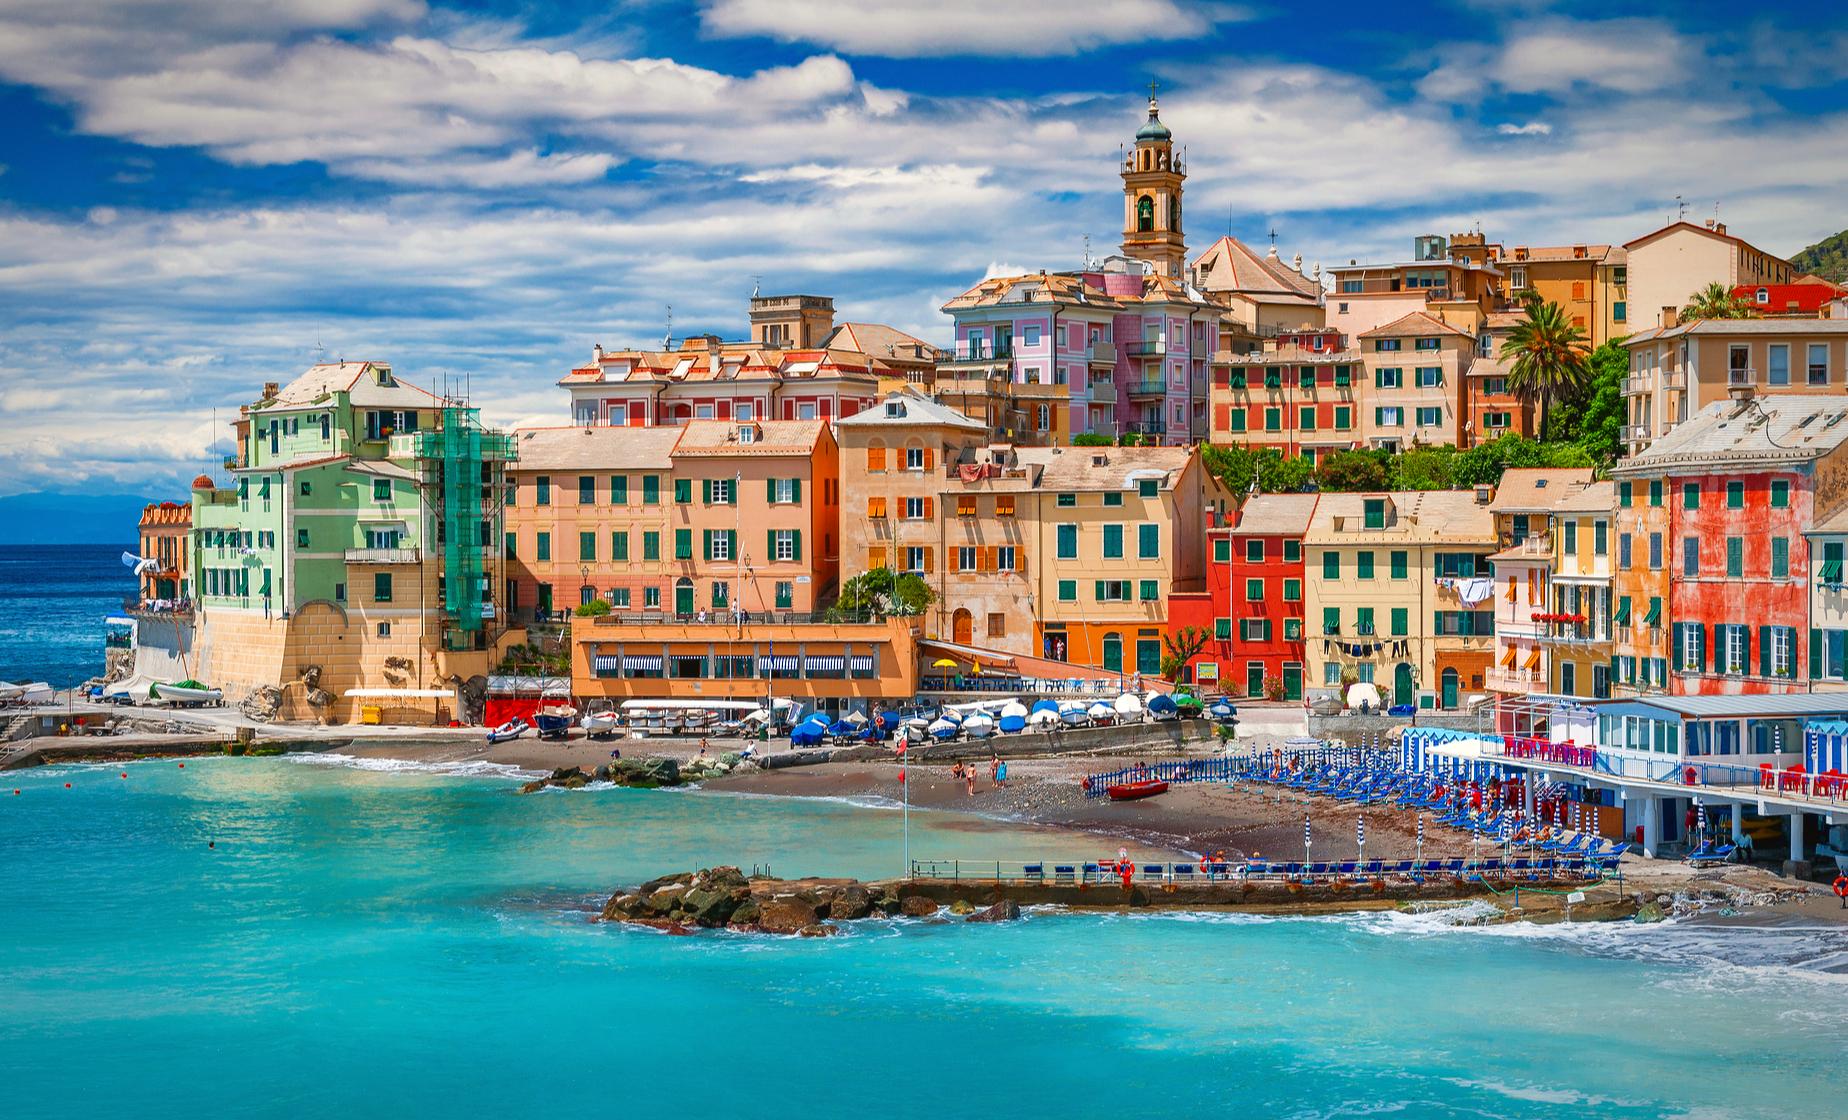 A Tale of One City: Genoa